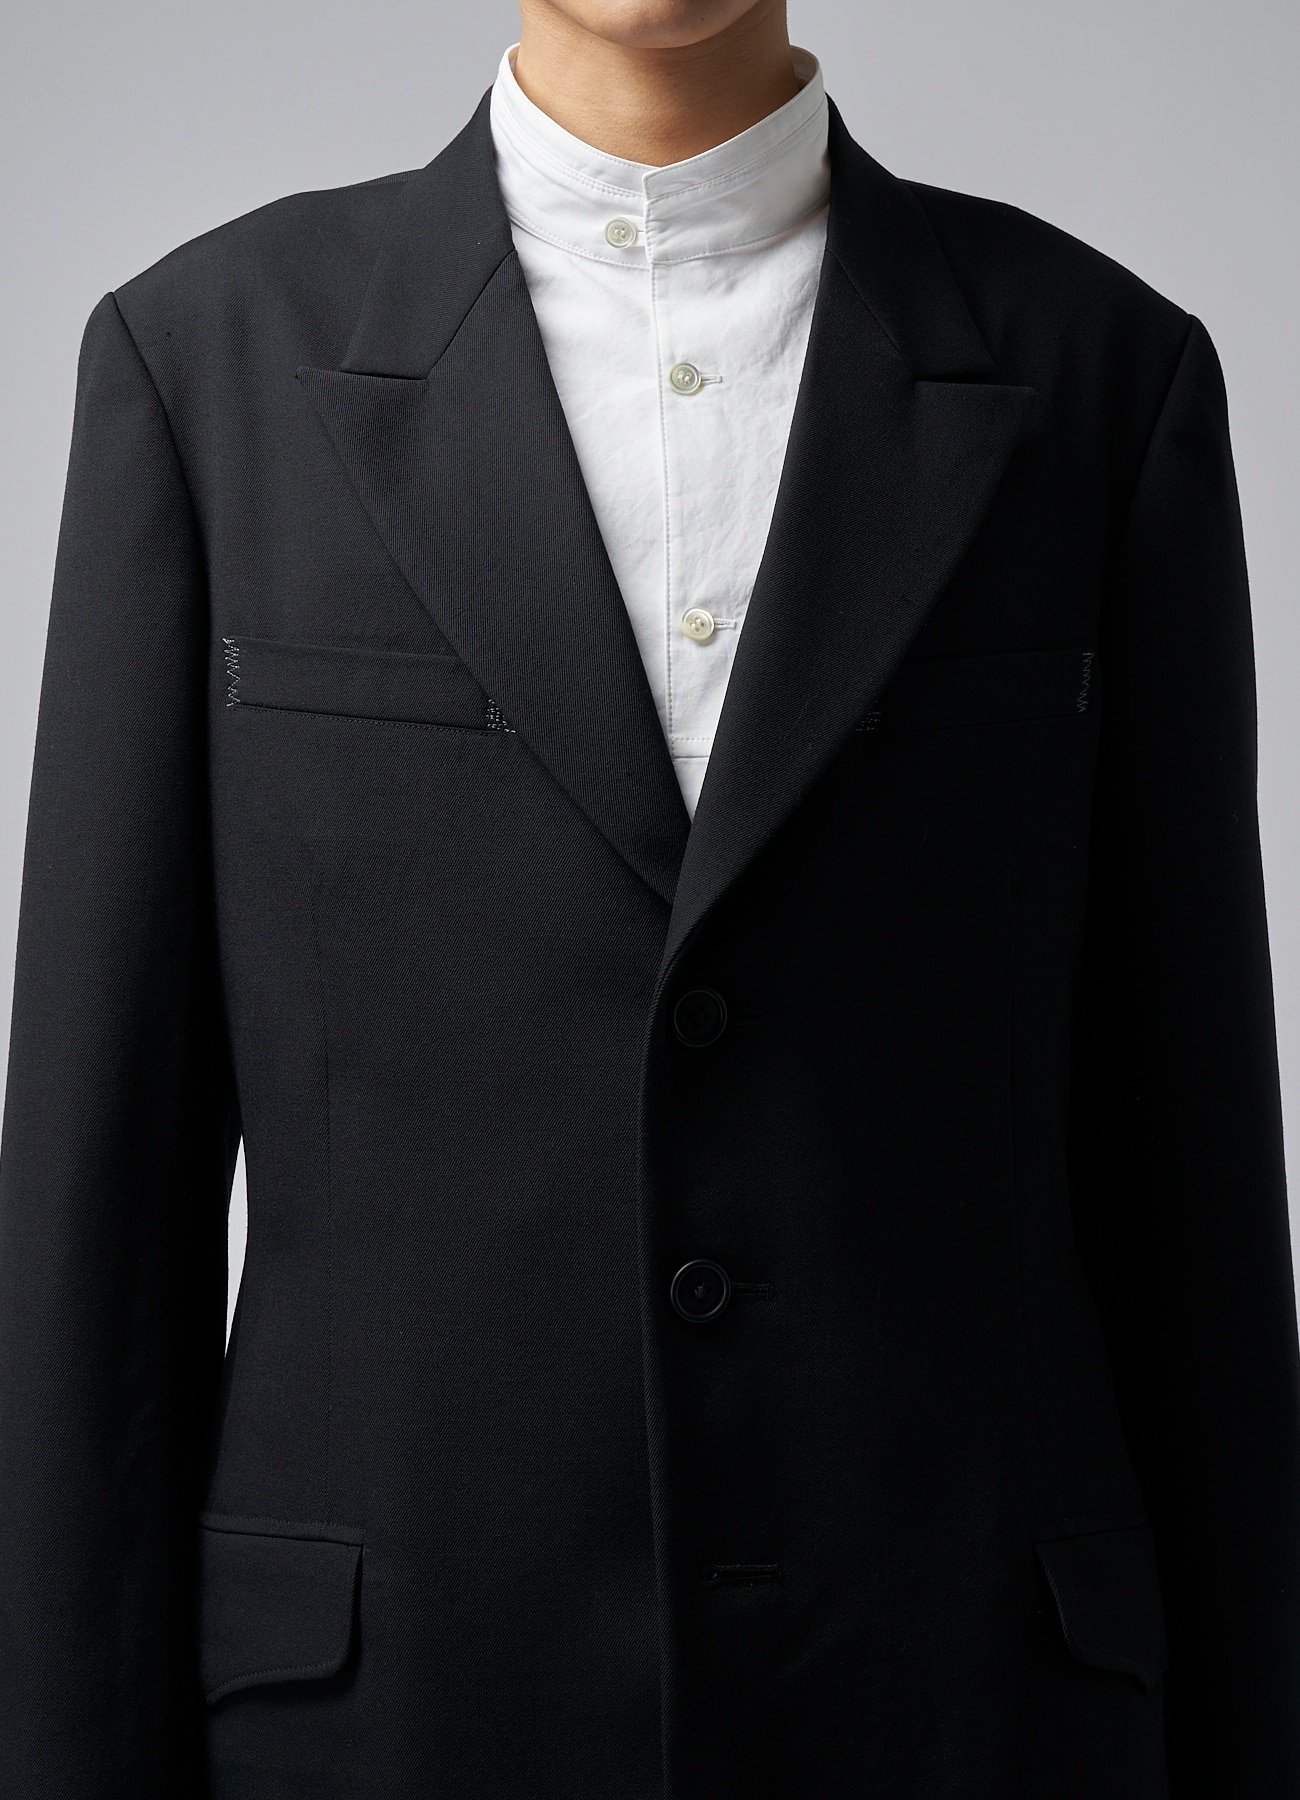 WOOL GABARDINE 3-BUTTON JACKET WITH PEAK LAPELS(S BLACK): Y's for 